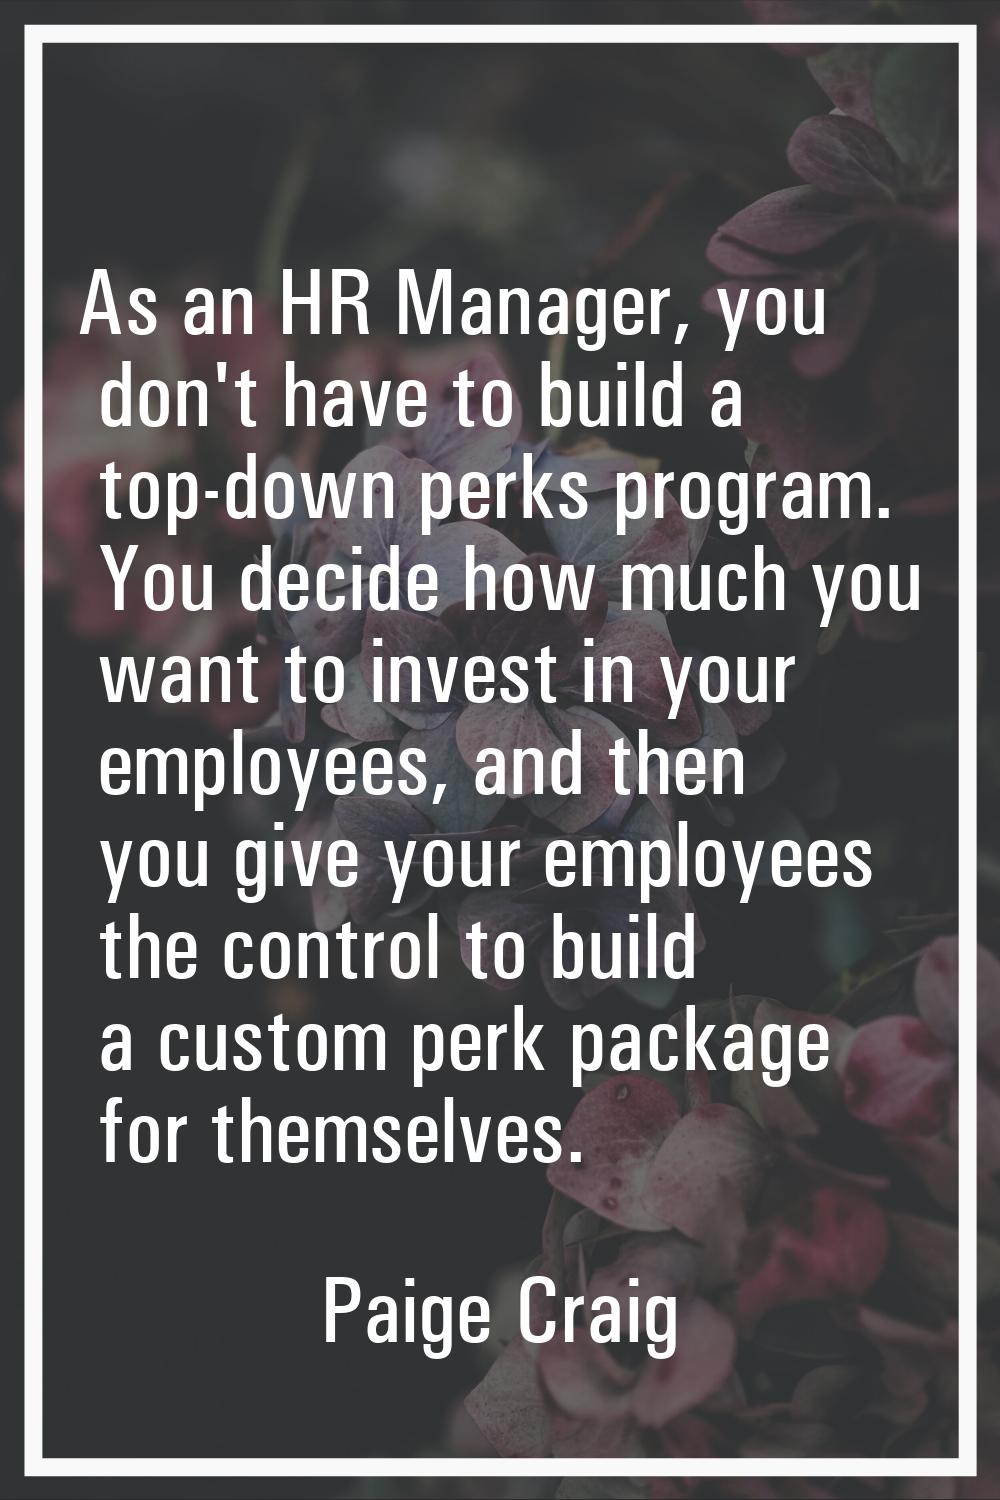 As an HR Manager, you don't have to build a top-down perks program. You decide how much you want to